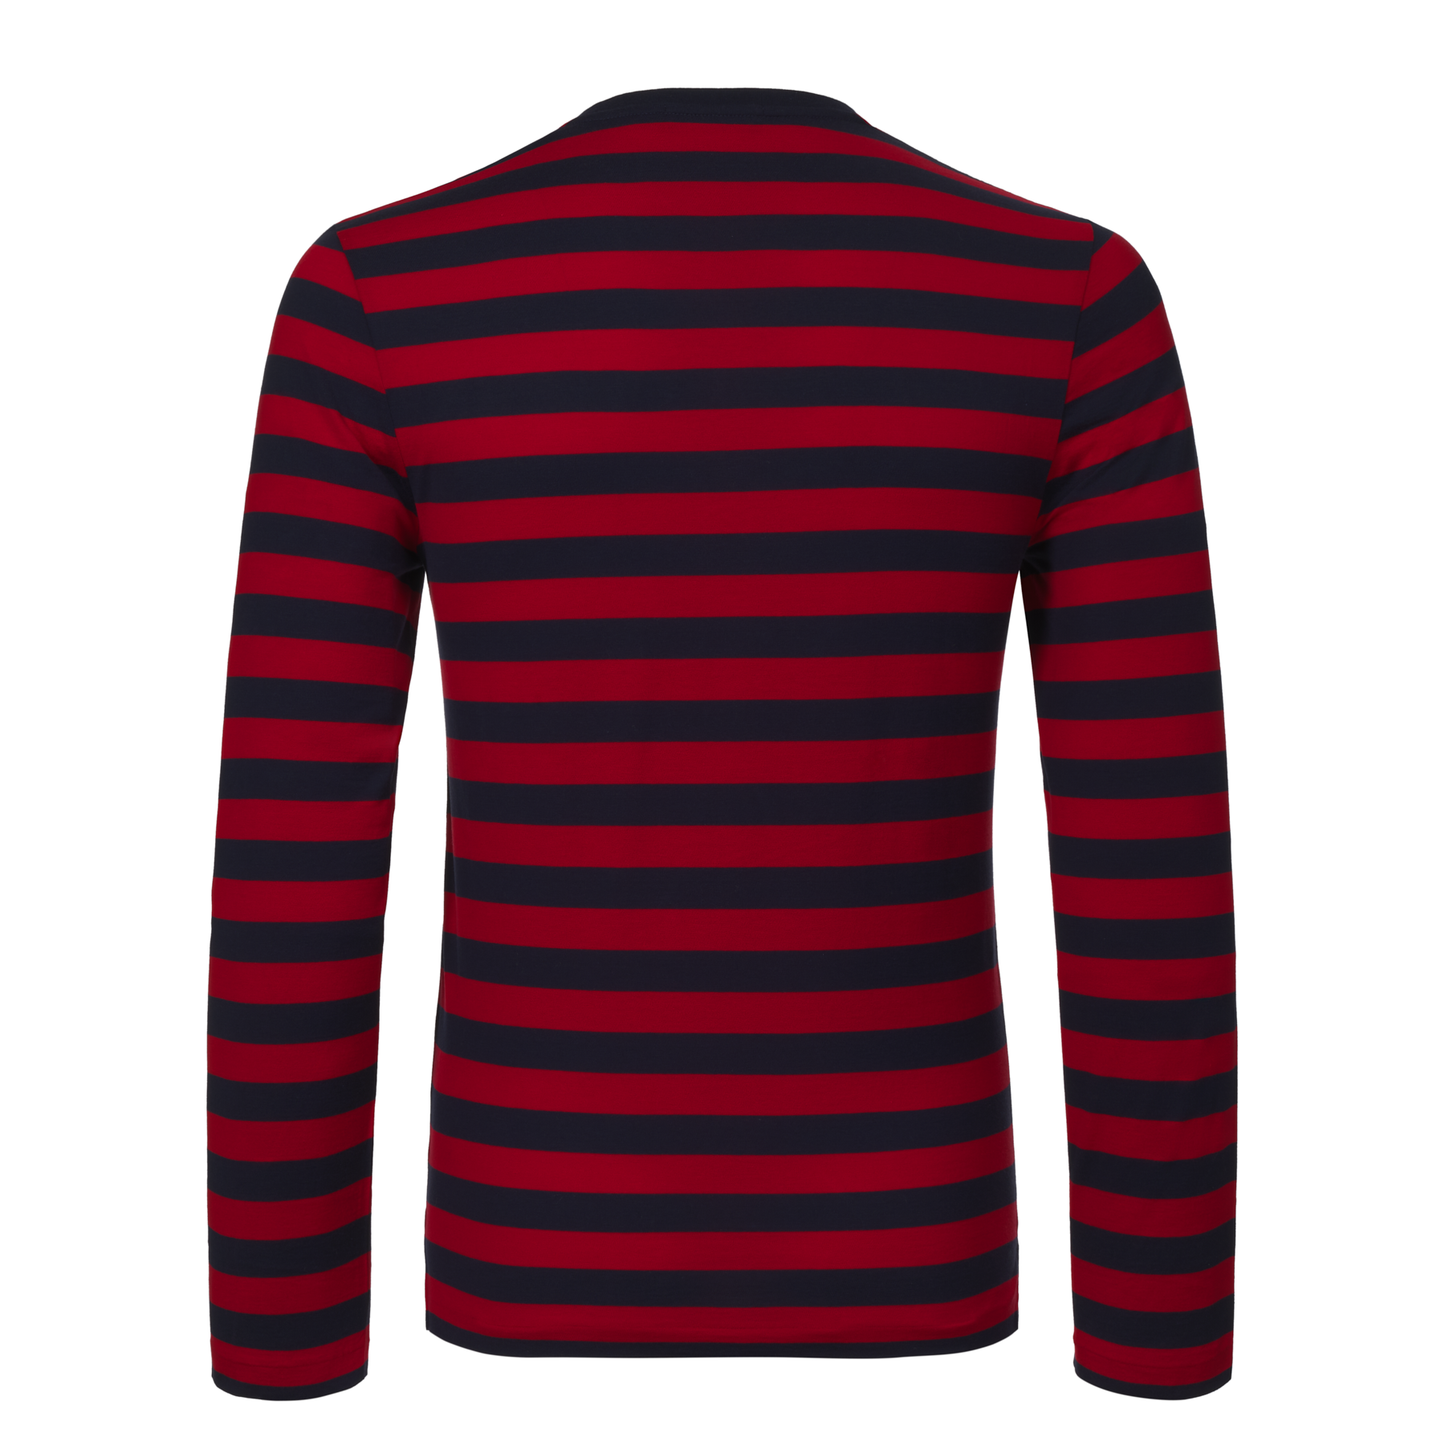 Crew-Neck Pima Cotton T-Shirt in Red